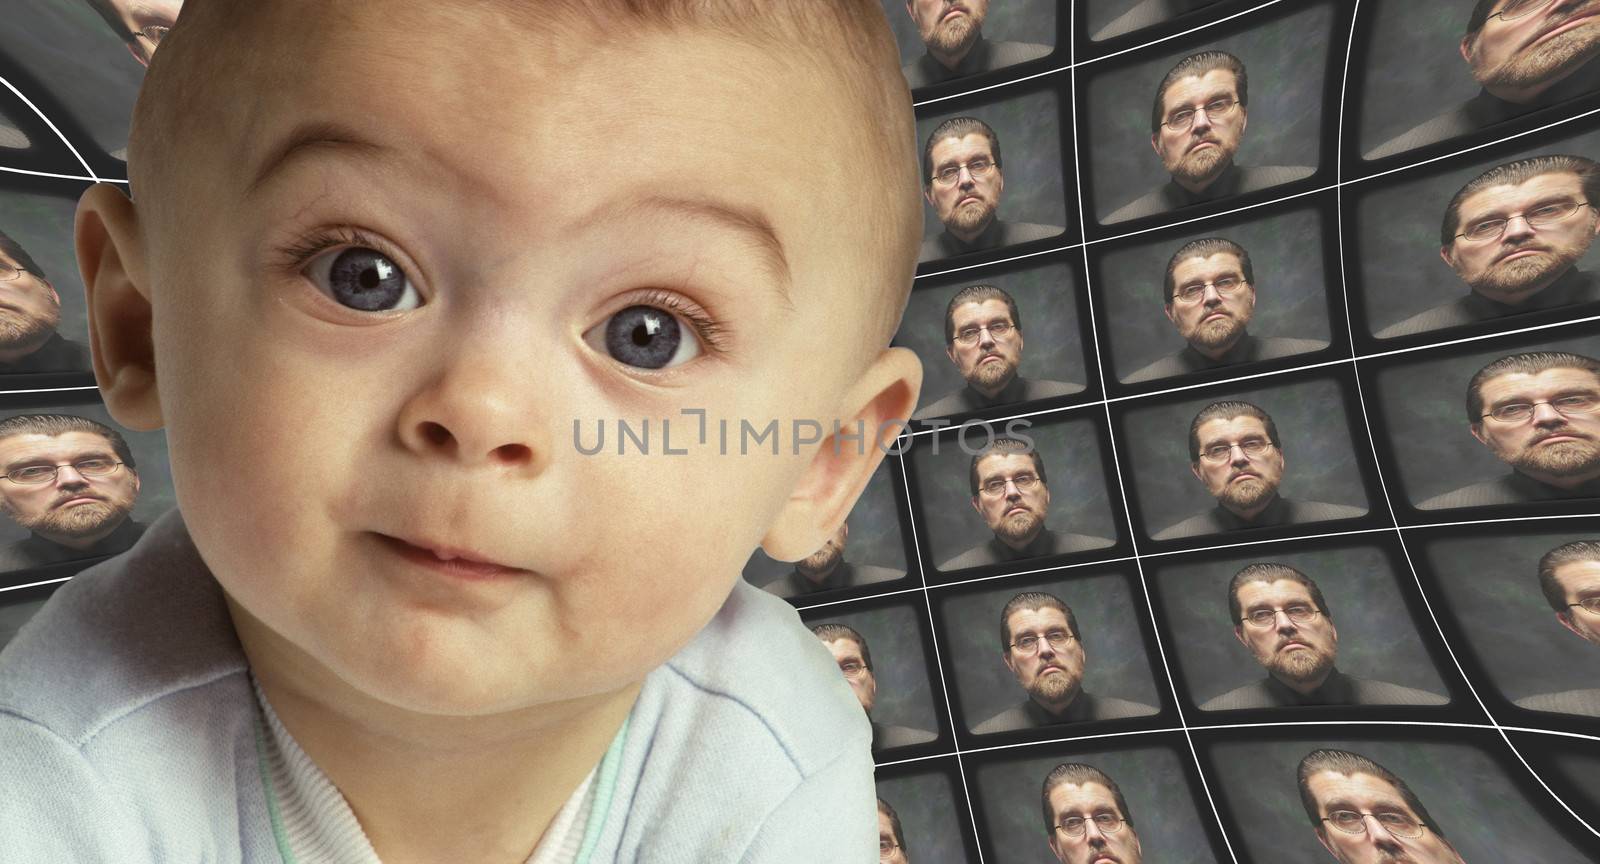 A baby facing camera surrounded by screens of authority figure by Balefire9